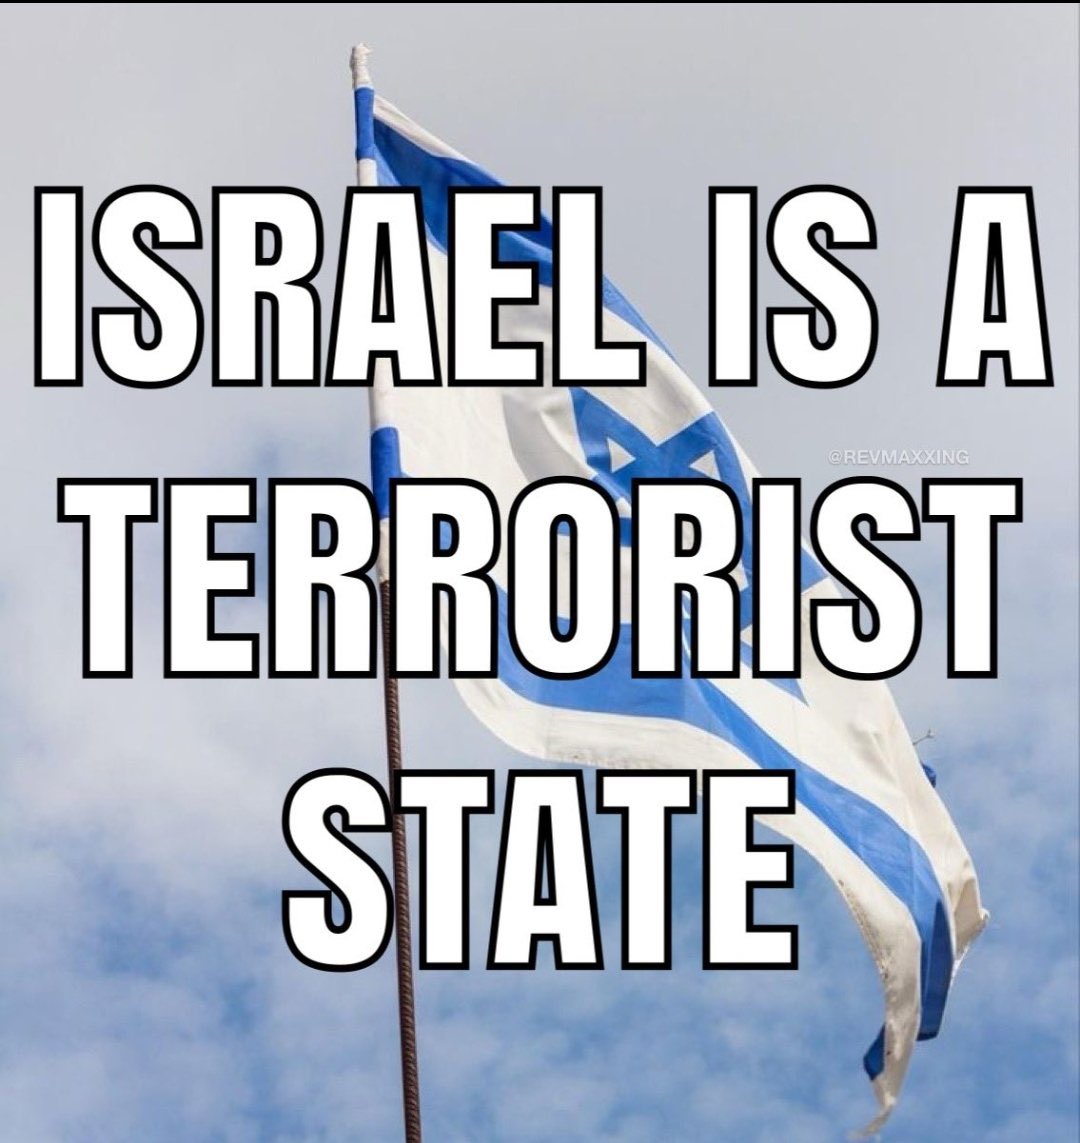 Zionists are terrorists. Israel is a genocidal terrorist state.